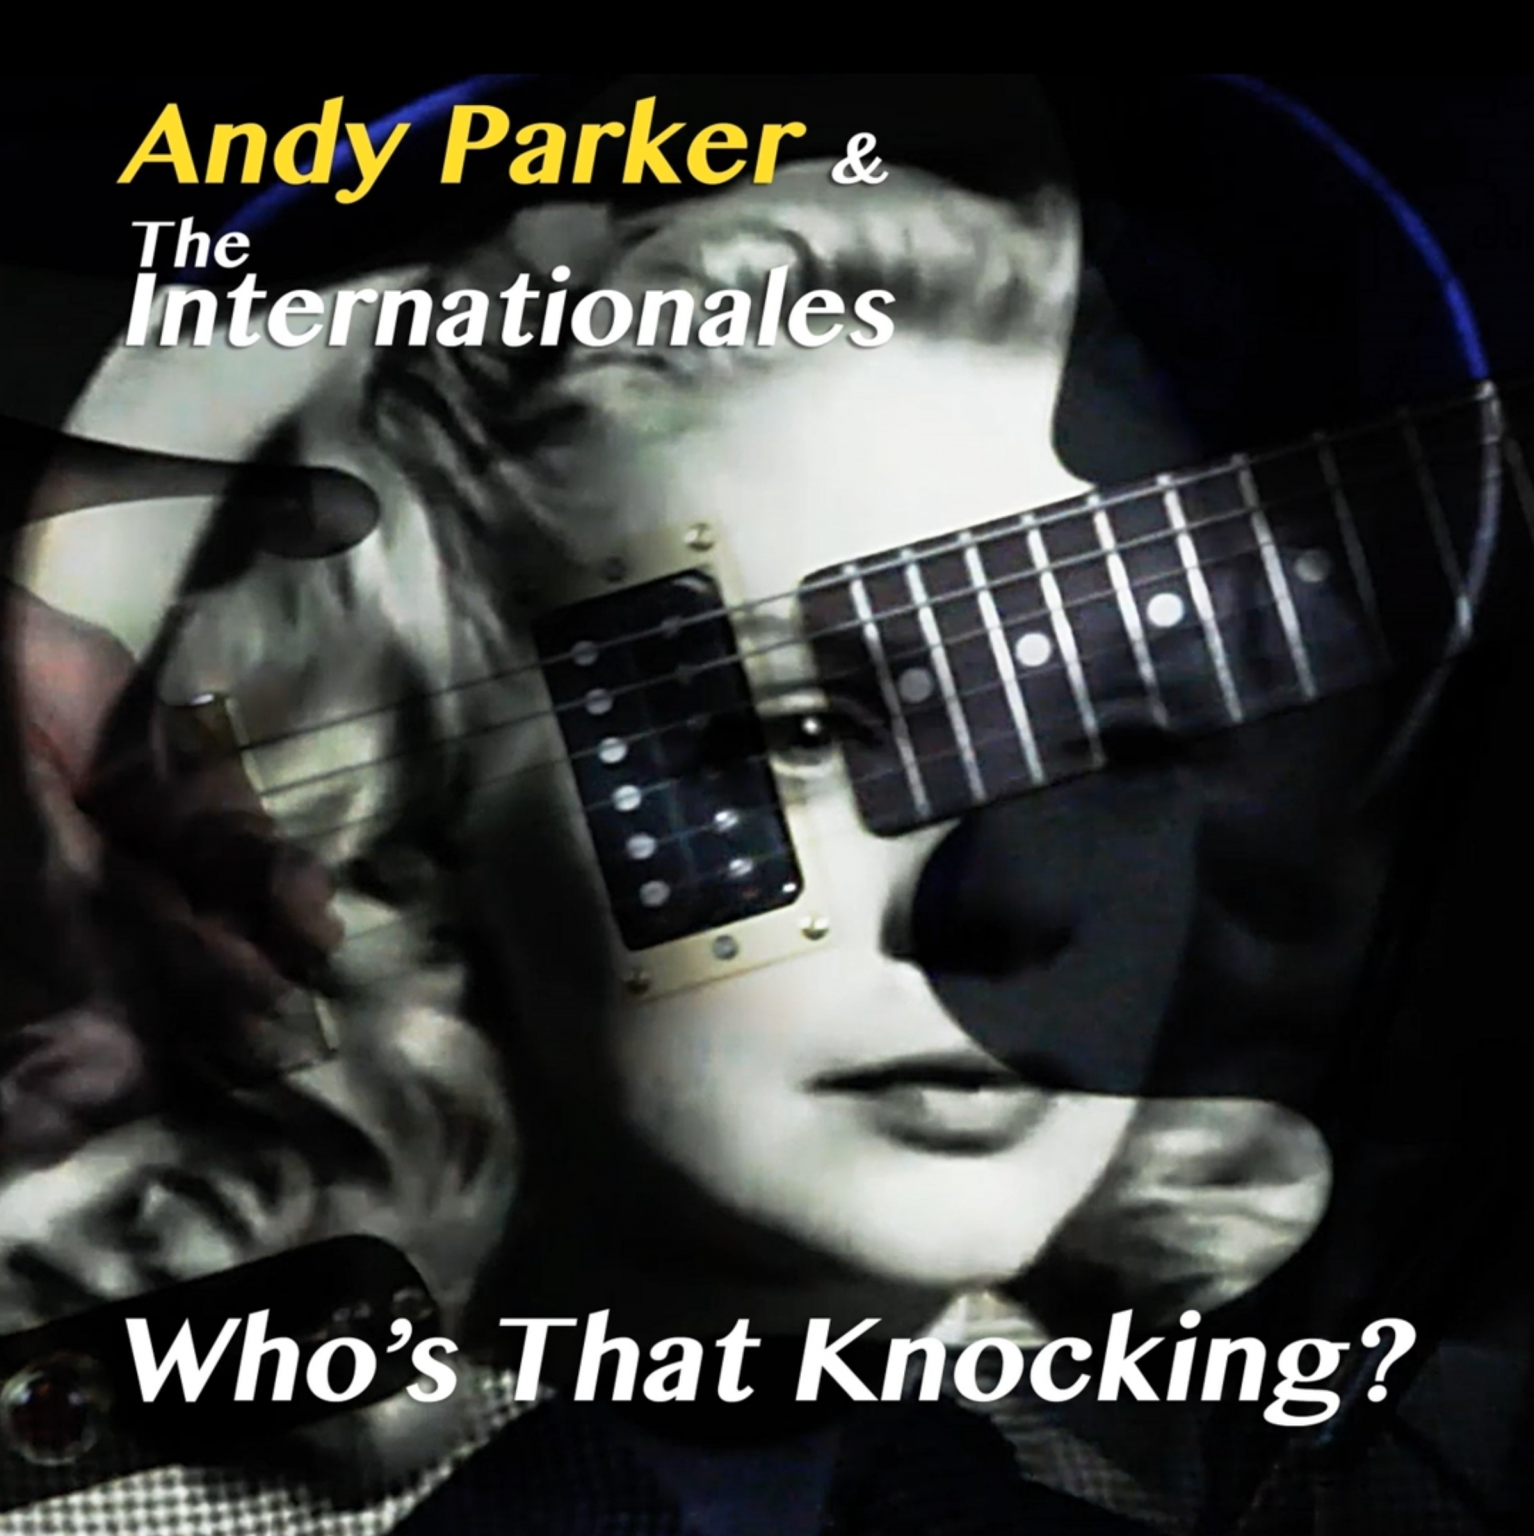 Whos That Knocking - Andy Parker and the Internationales